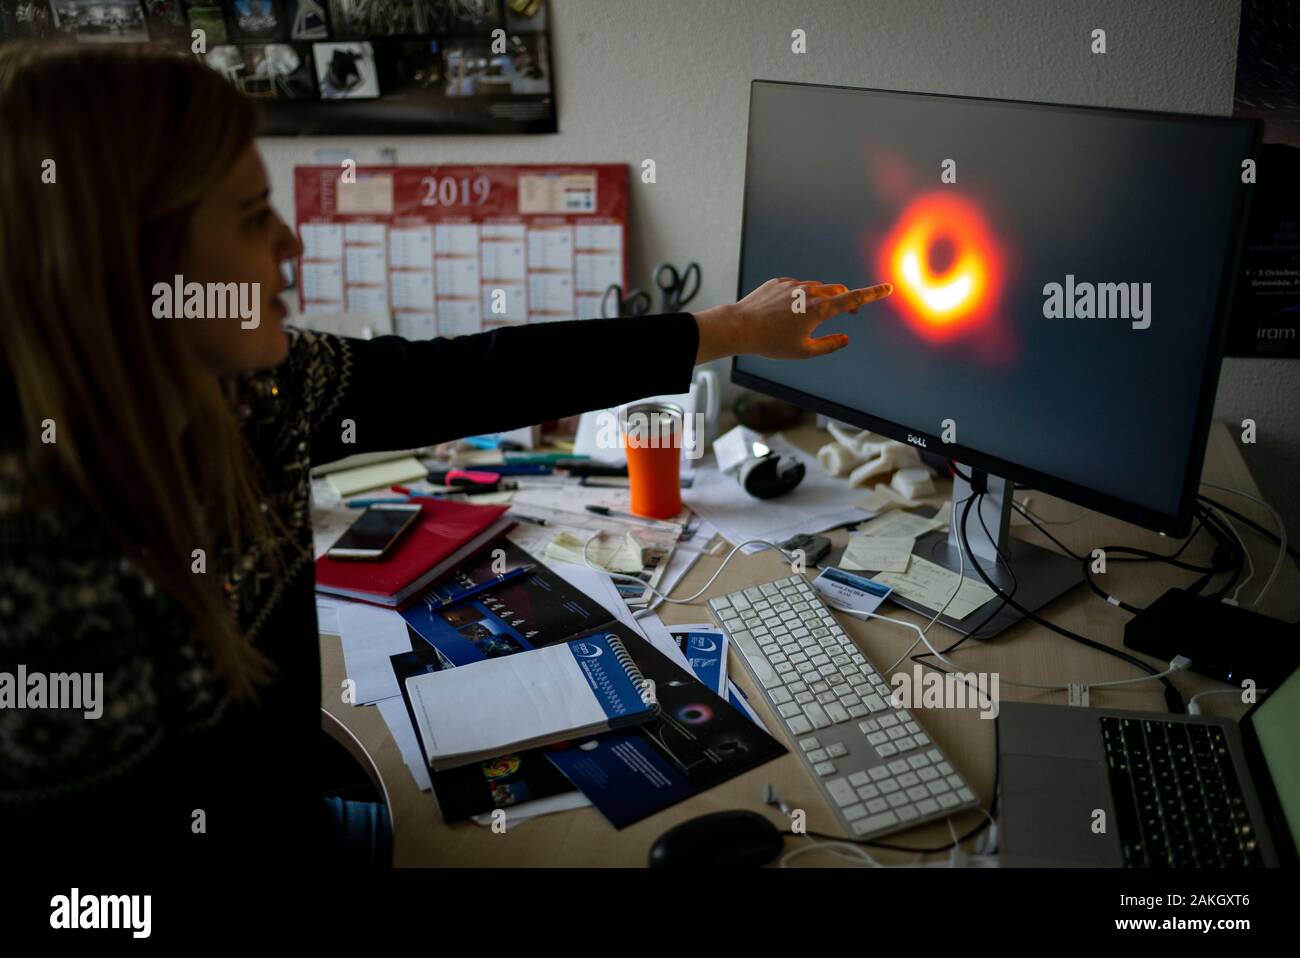 France, Isere, Saint Martin d'Heres, university field, Institute of  Millimetre Radio Astronomy, astronomer showing the very first image of a  black hole obtained from the Event Horizon Telescope (EHT), supermassive  black hole